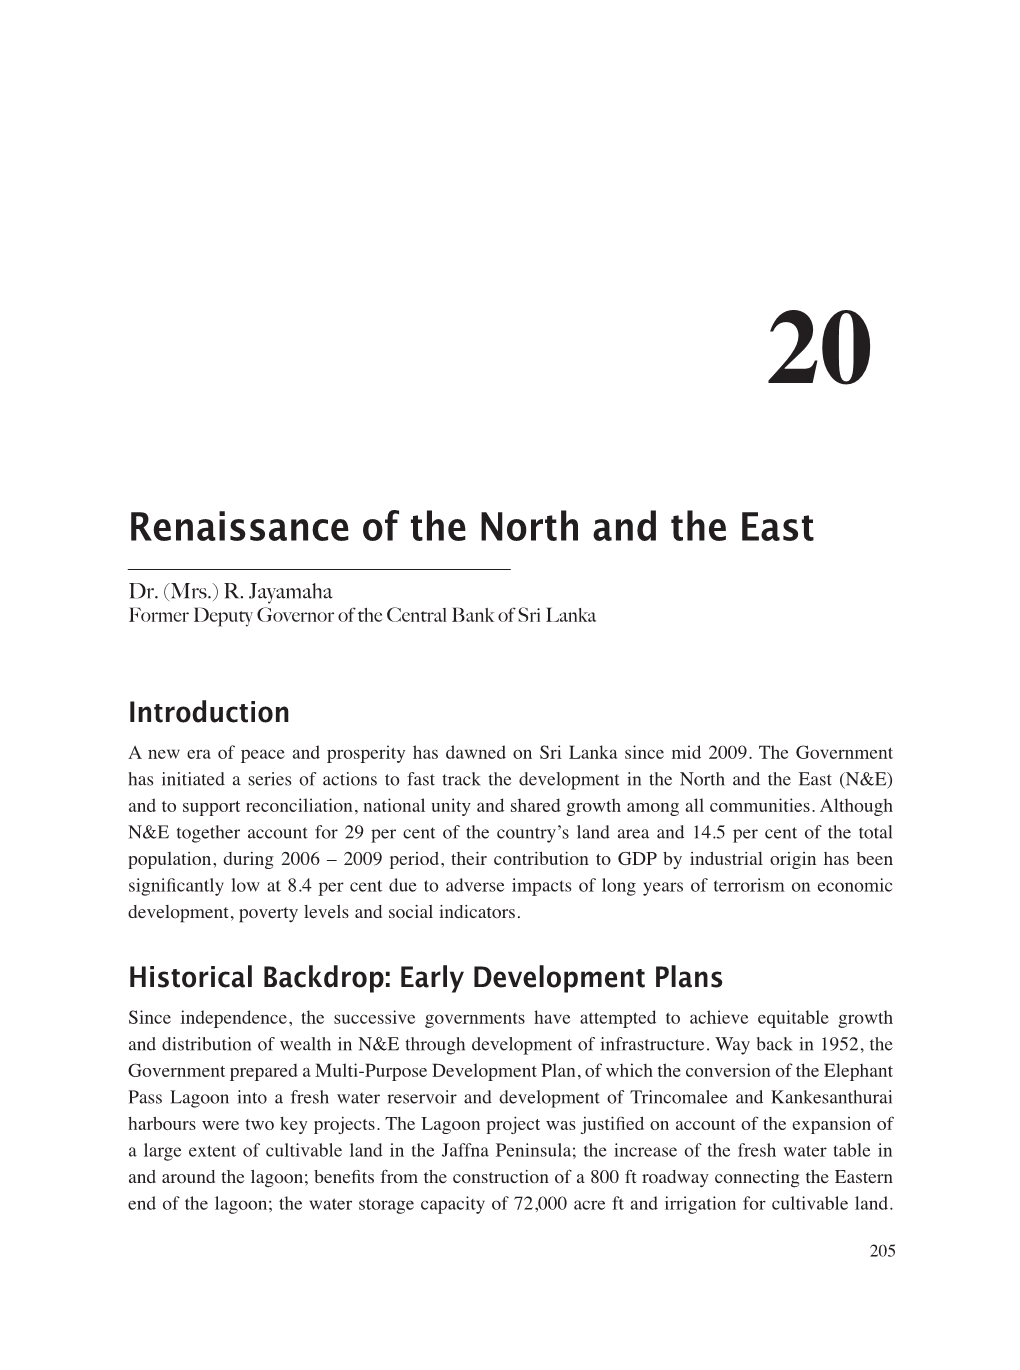 Renaissance of the North and the East